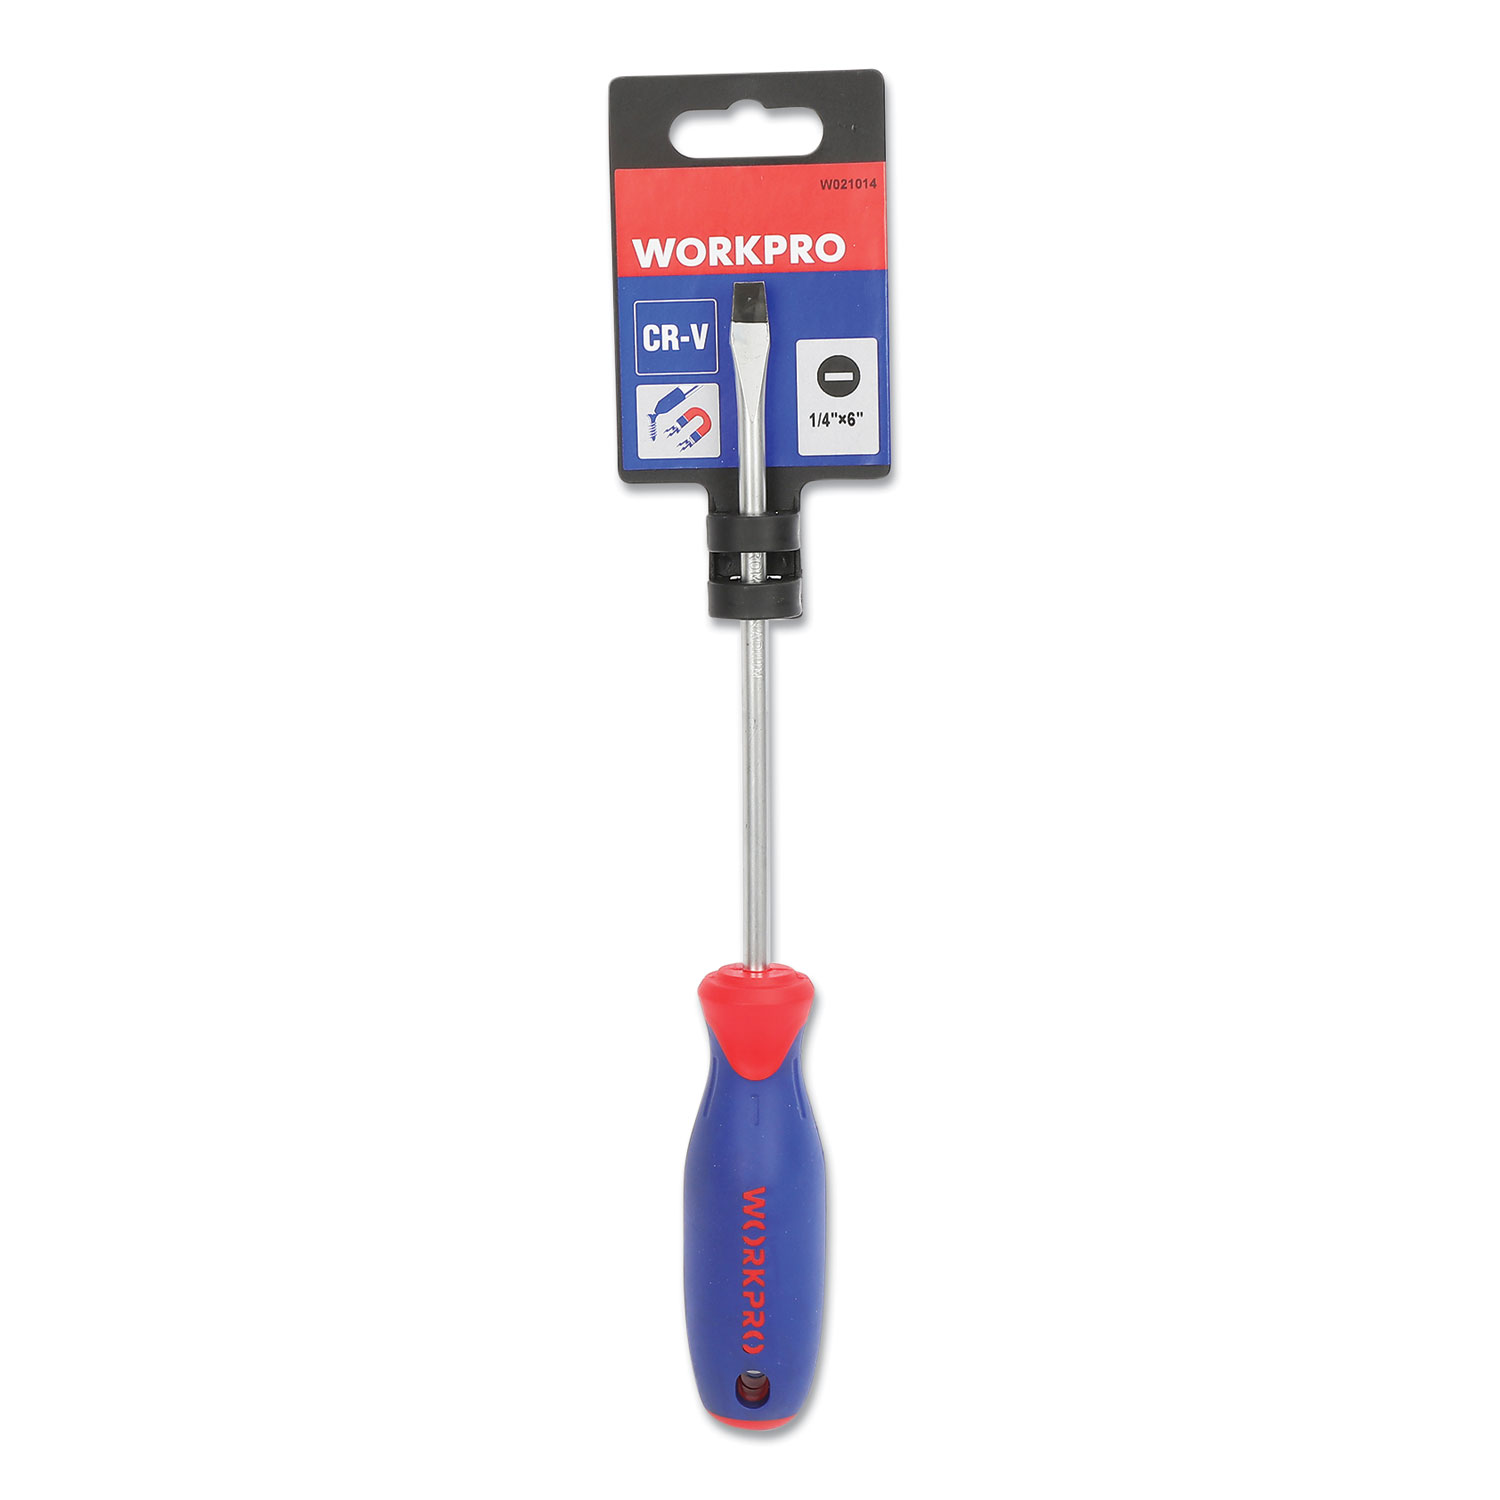 Workpro® Straight-Handle Cushion-Grip Screwdriver, 1/4 Slotted Tip, 6 Shaft